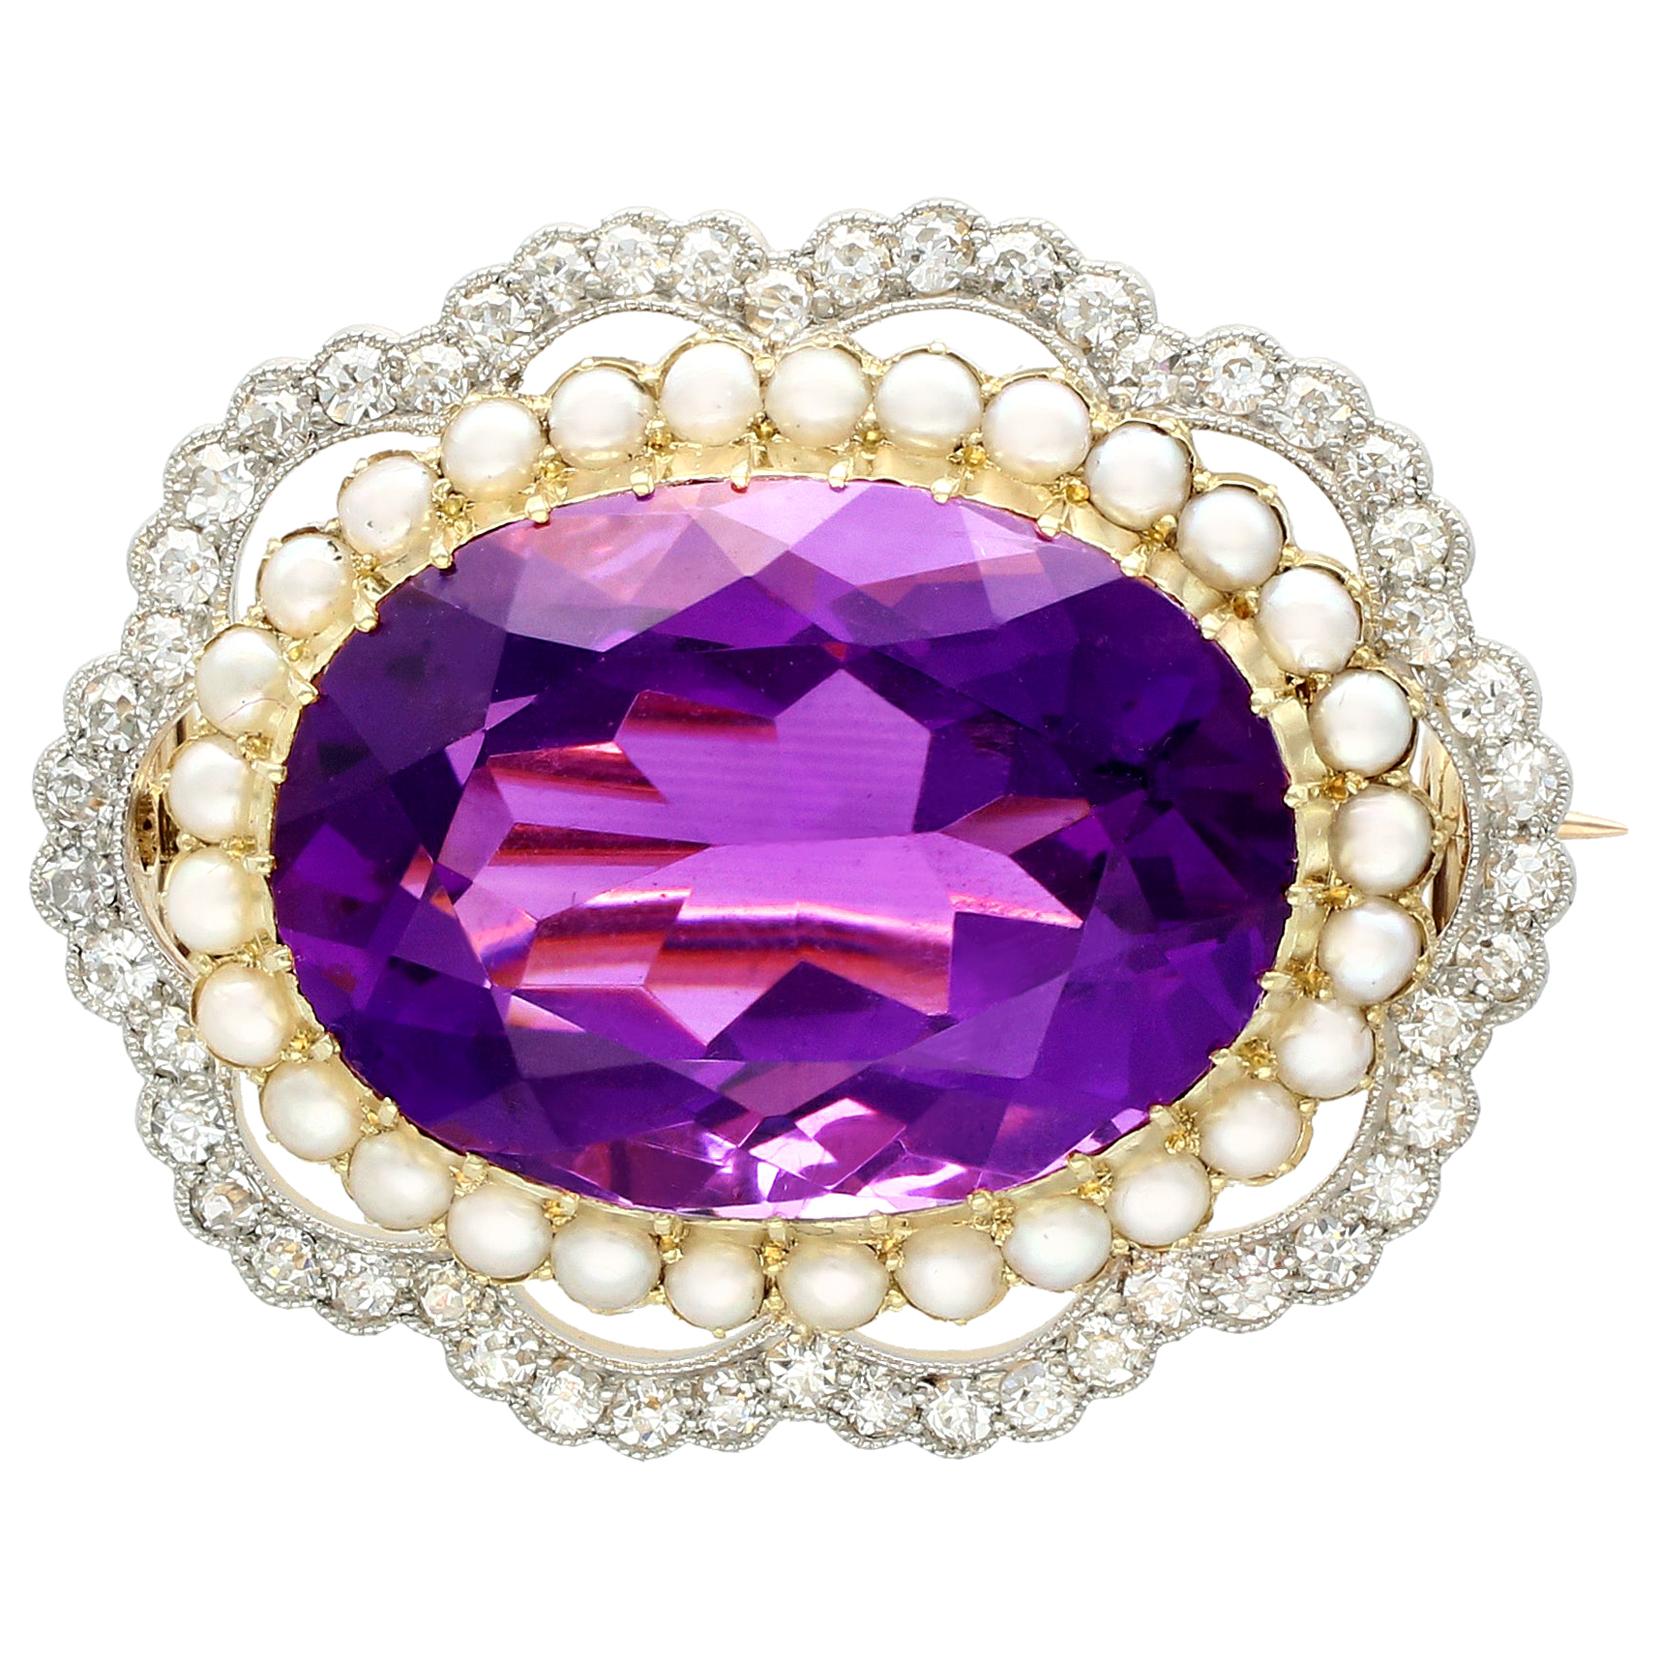 Antique 34.49 Carat Amethyst and 2.95 Carat Diamond Pearl and Yellow Gold Brooch